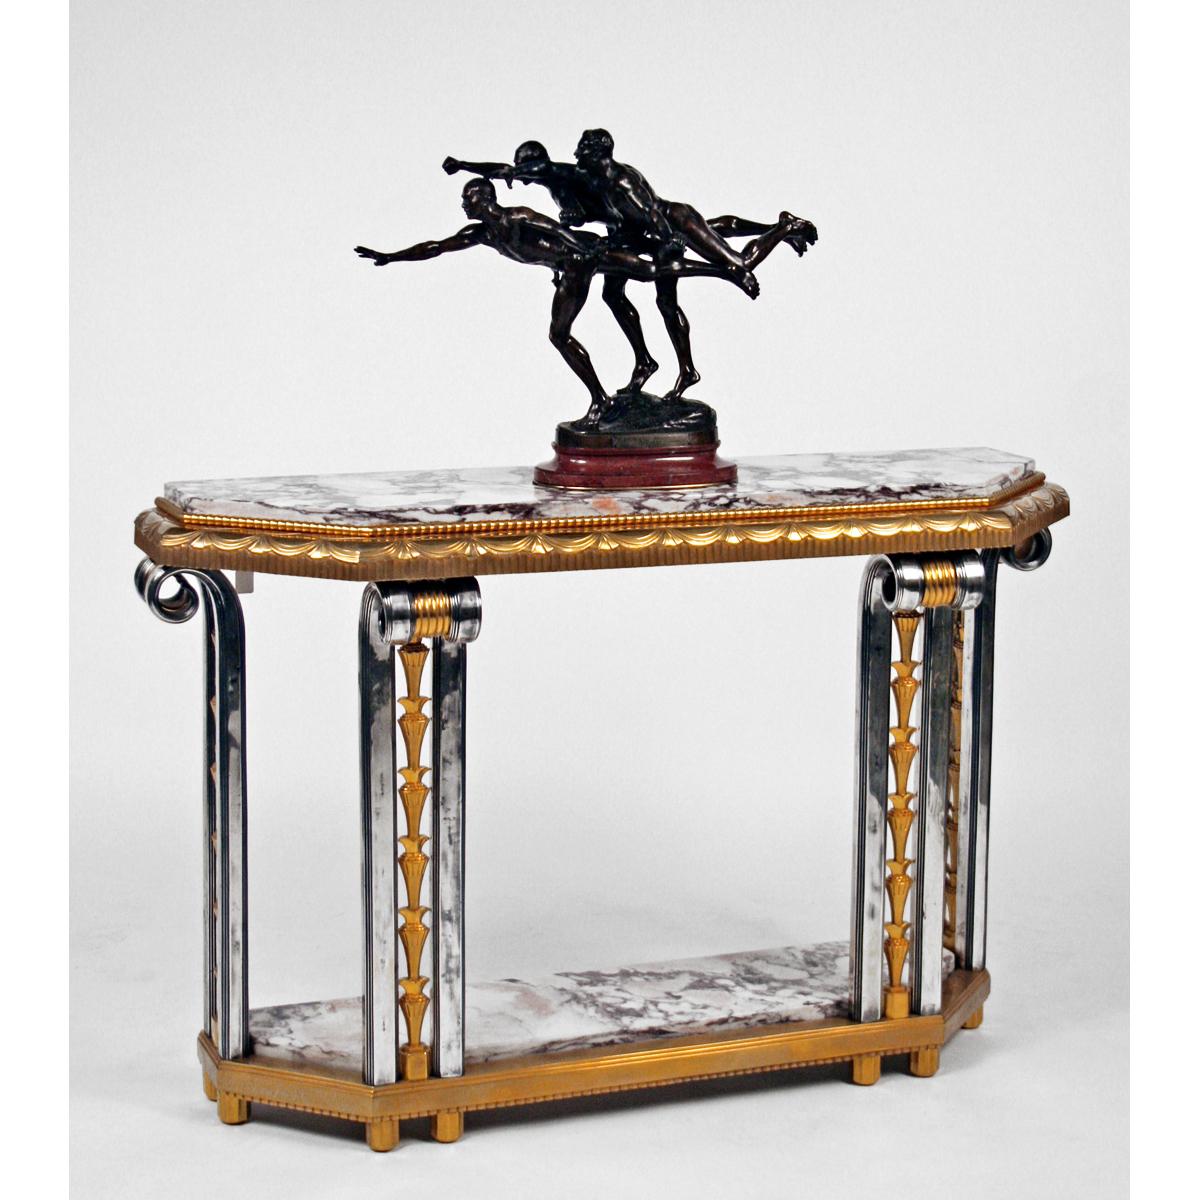 Art Deco gilded and platted bronze console table, designed and executed by Charles Dalmas & Marcell Guillot for a private home in Monaco.
Made in France
circa 1930.